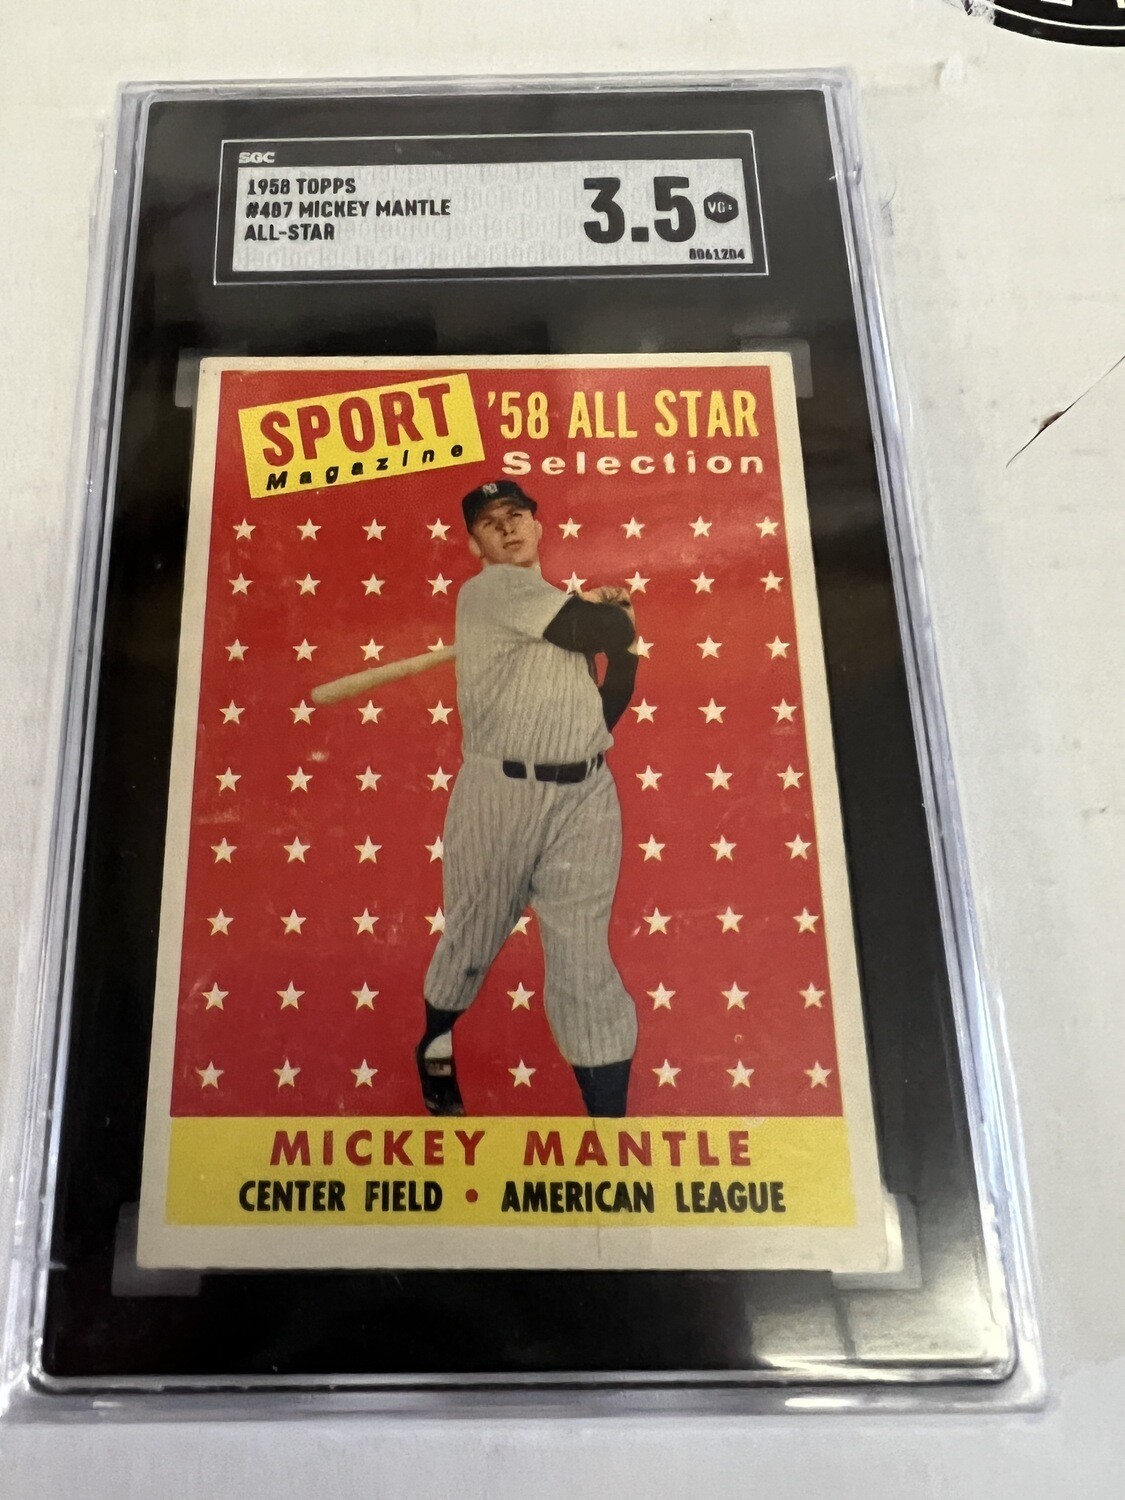 1958 Topps #487 Mickey Mantle All Star SGC 3.5